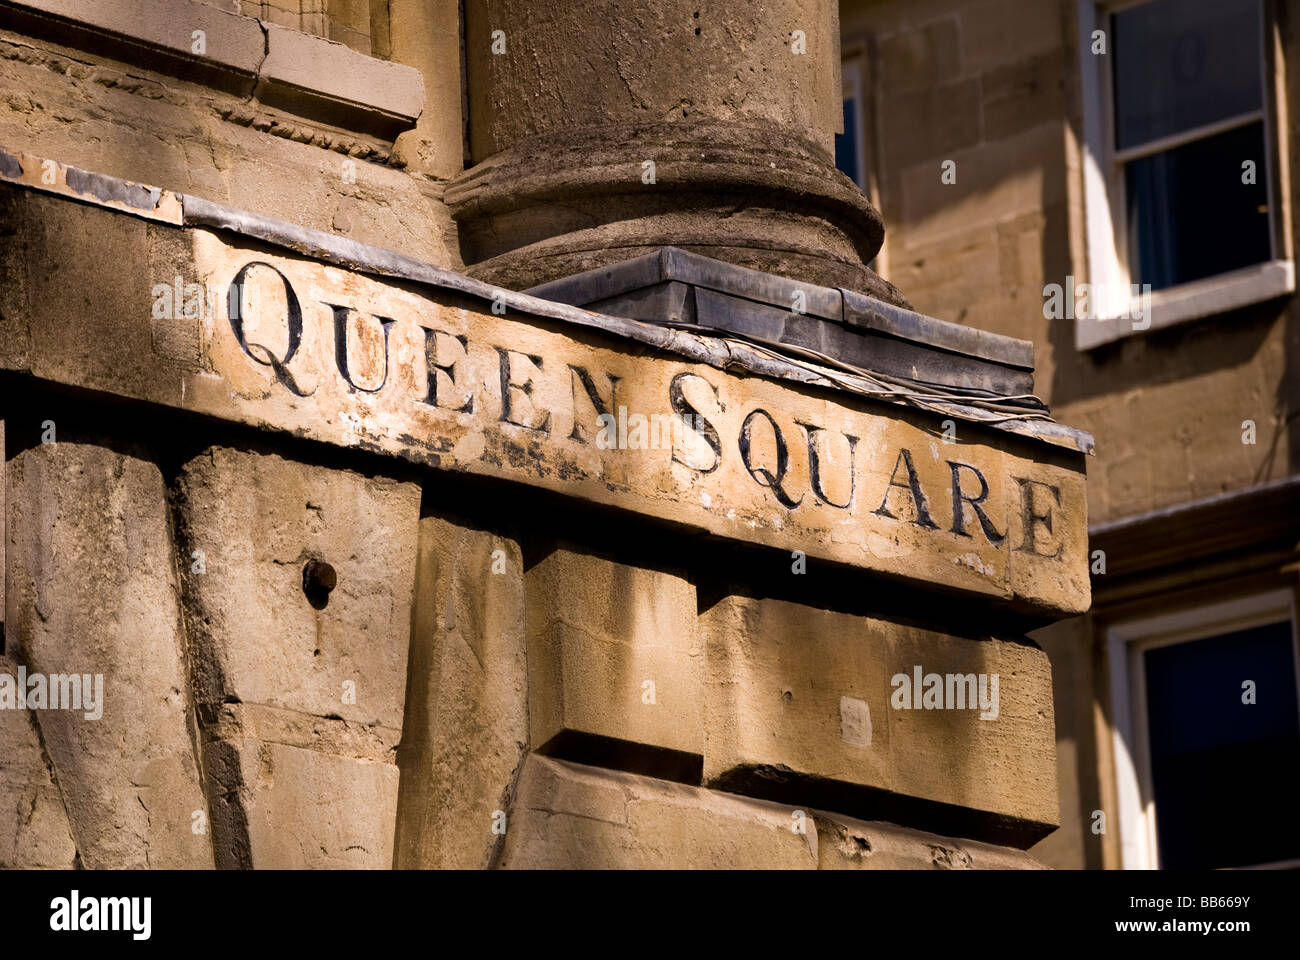 'Queen Square' chiselled in stone on the corner of a building, Bath, Somerset, England, UK Stock Photo